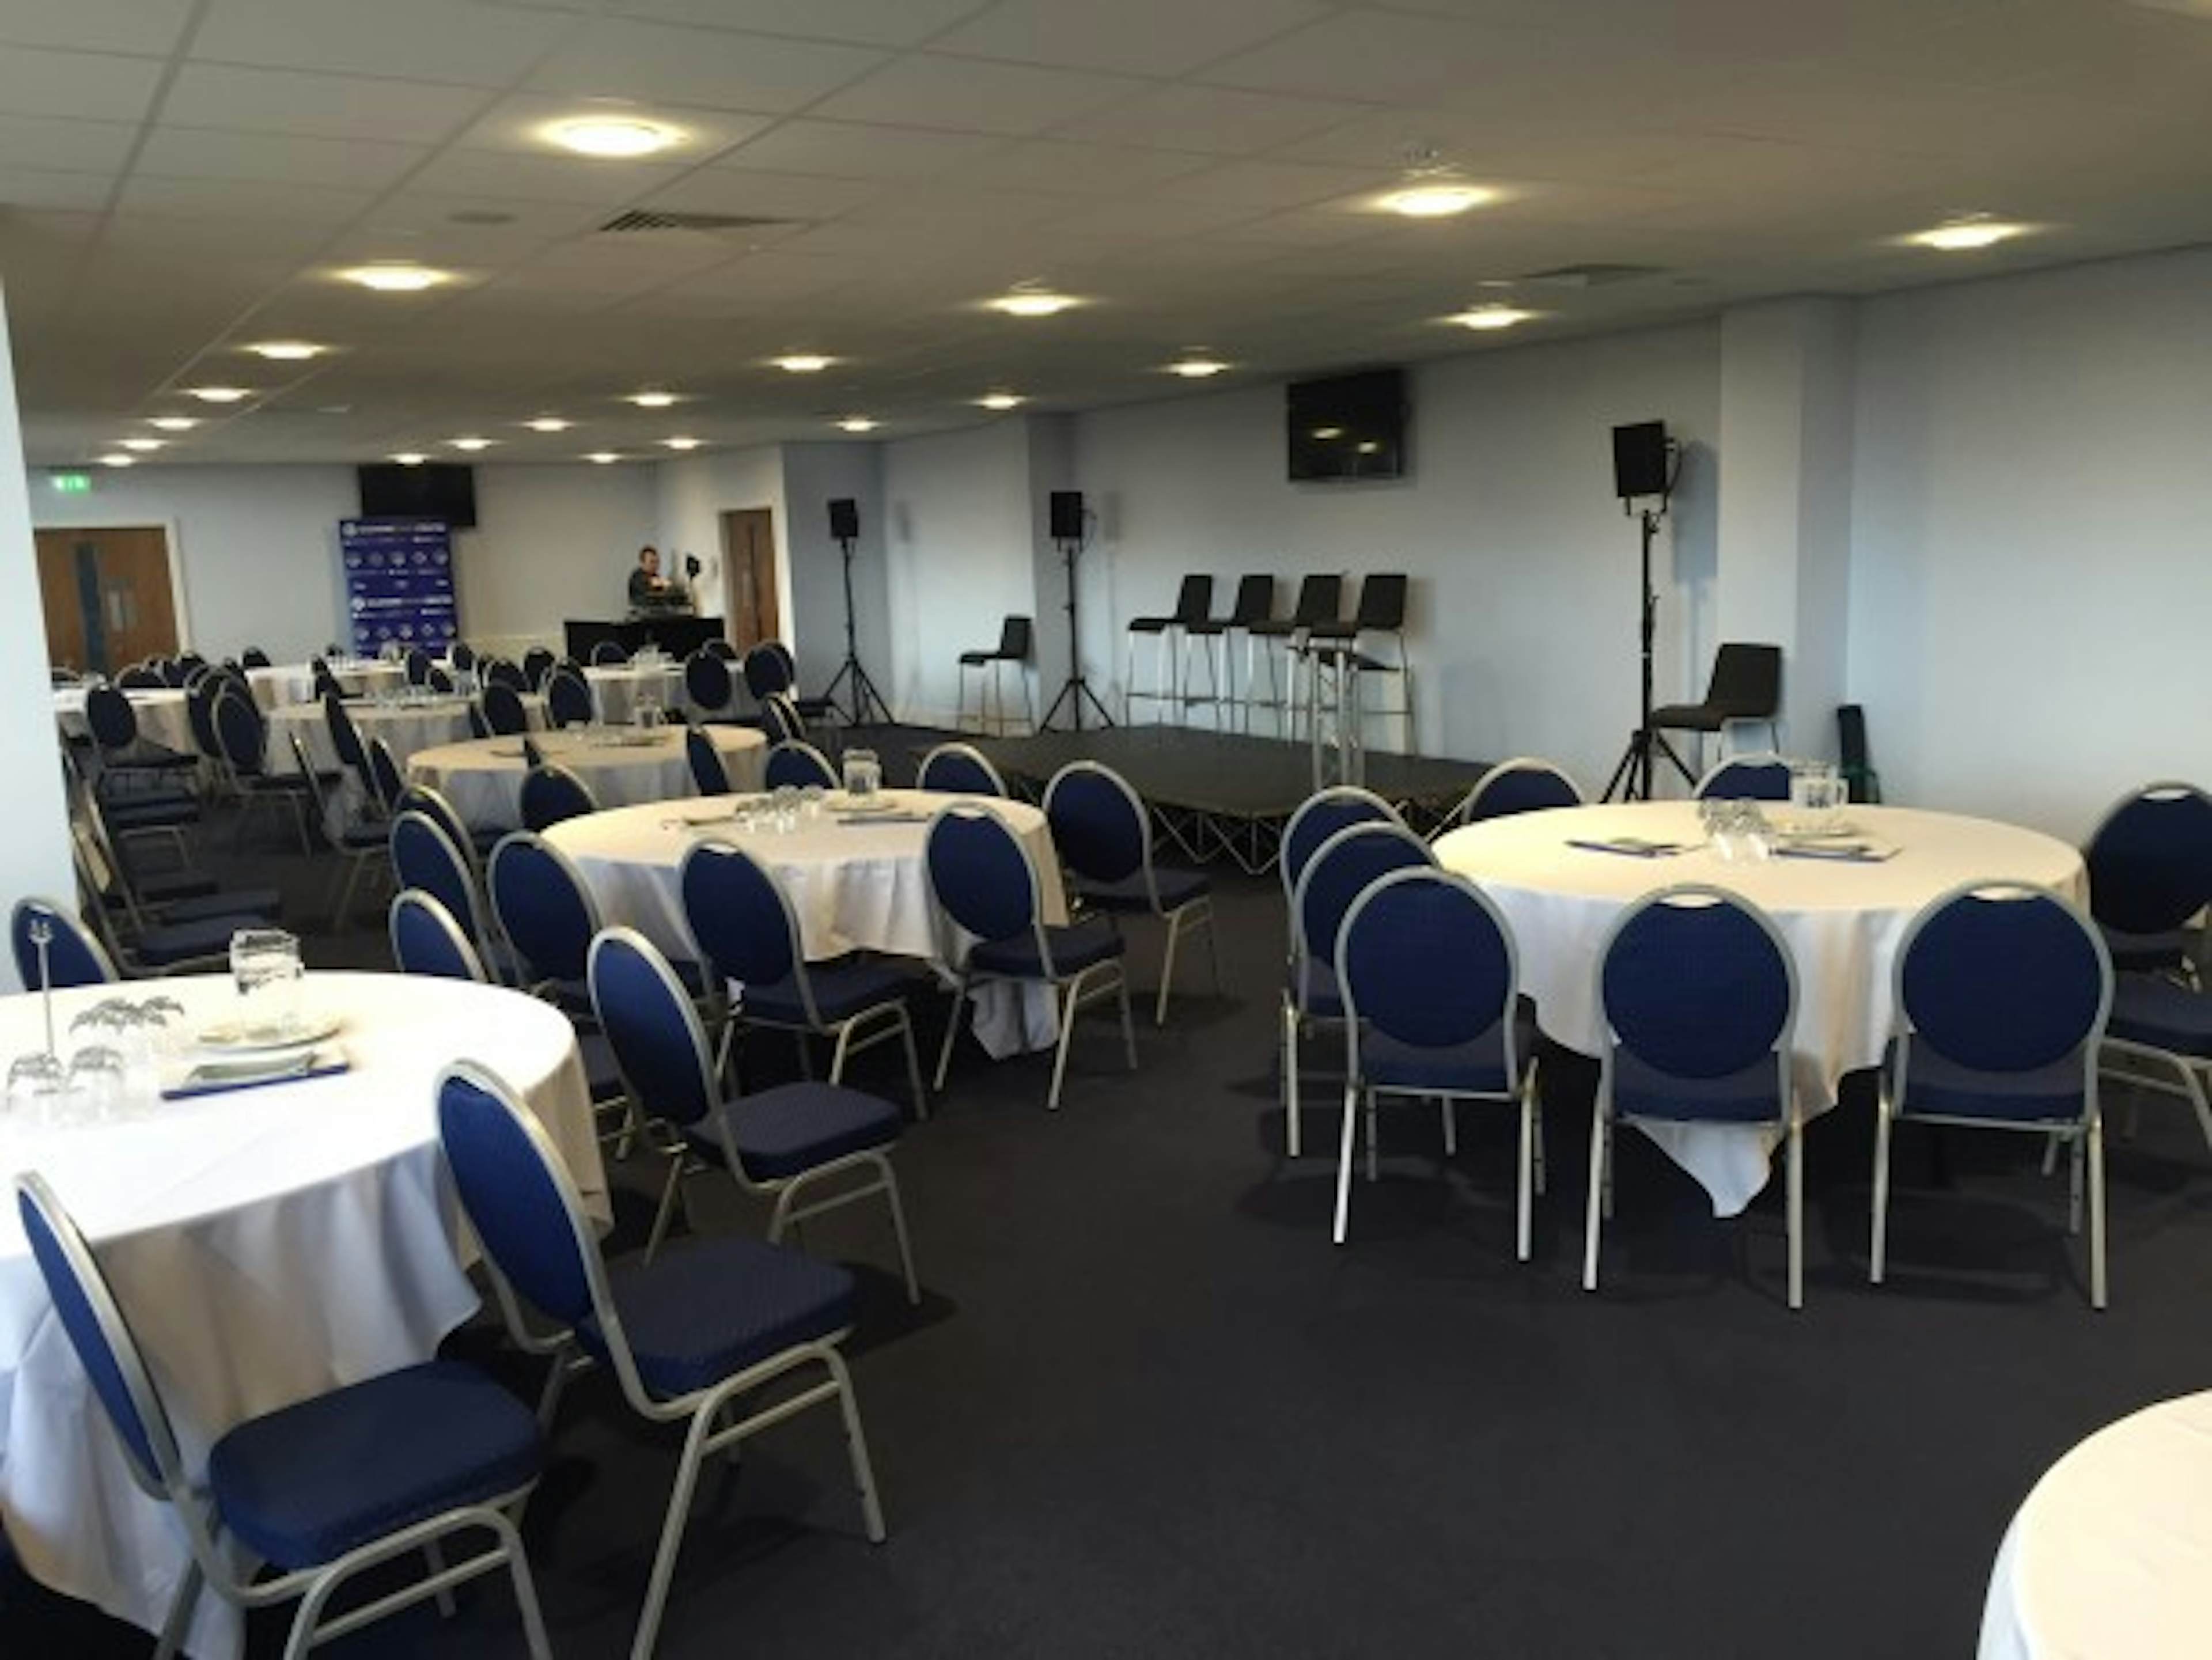 Meeting Rooms at Oldham Event Centre ...